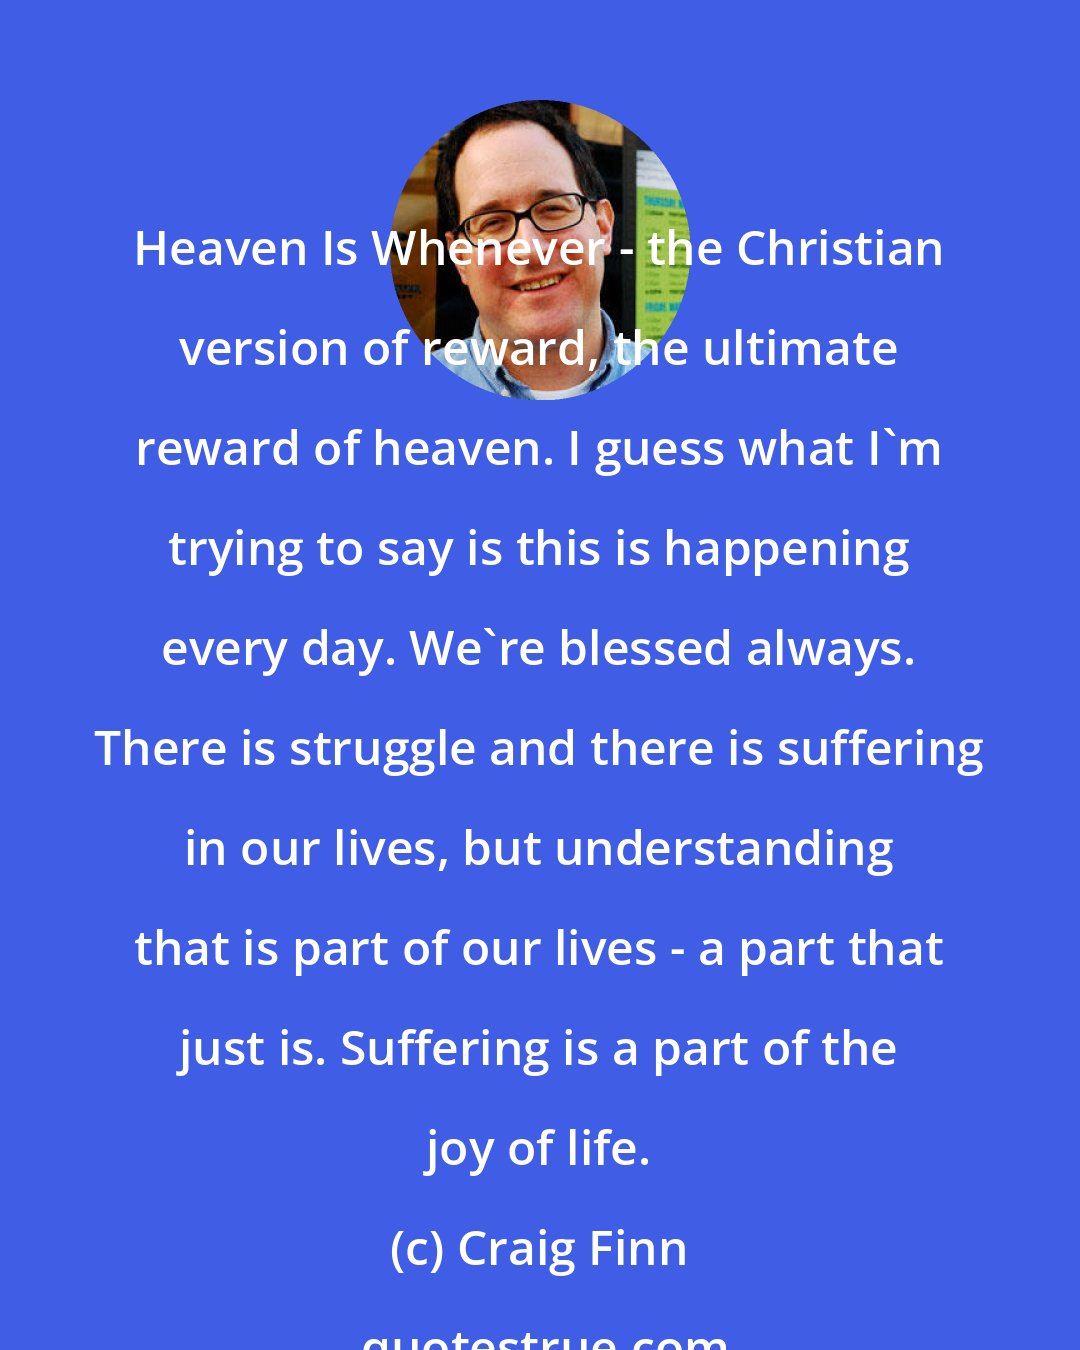 Craig Finn: Heaven Is Whenever - the Christian version of reward, the ultimate reward of heaven. I guess what I'm trying to say is this is happening every day. We're blessed always. There is struggle and there is suffering in our lives, but understanding that is part of our lives - a part that just is. Suffering is a part of the joy of life.